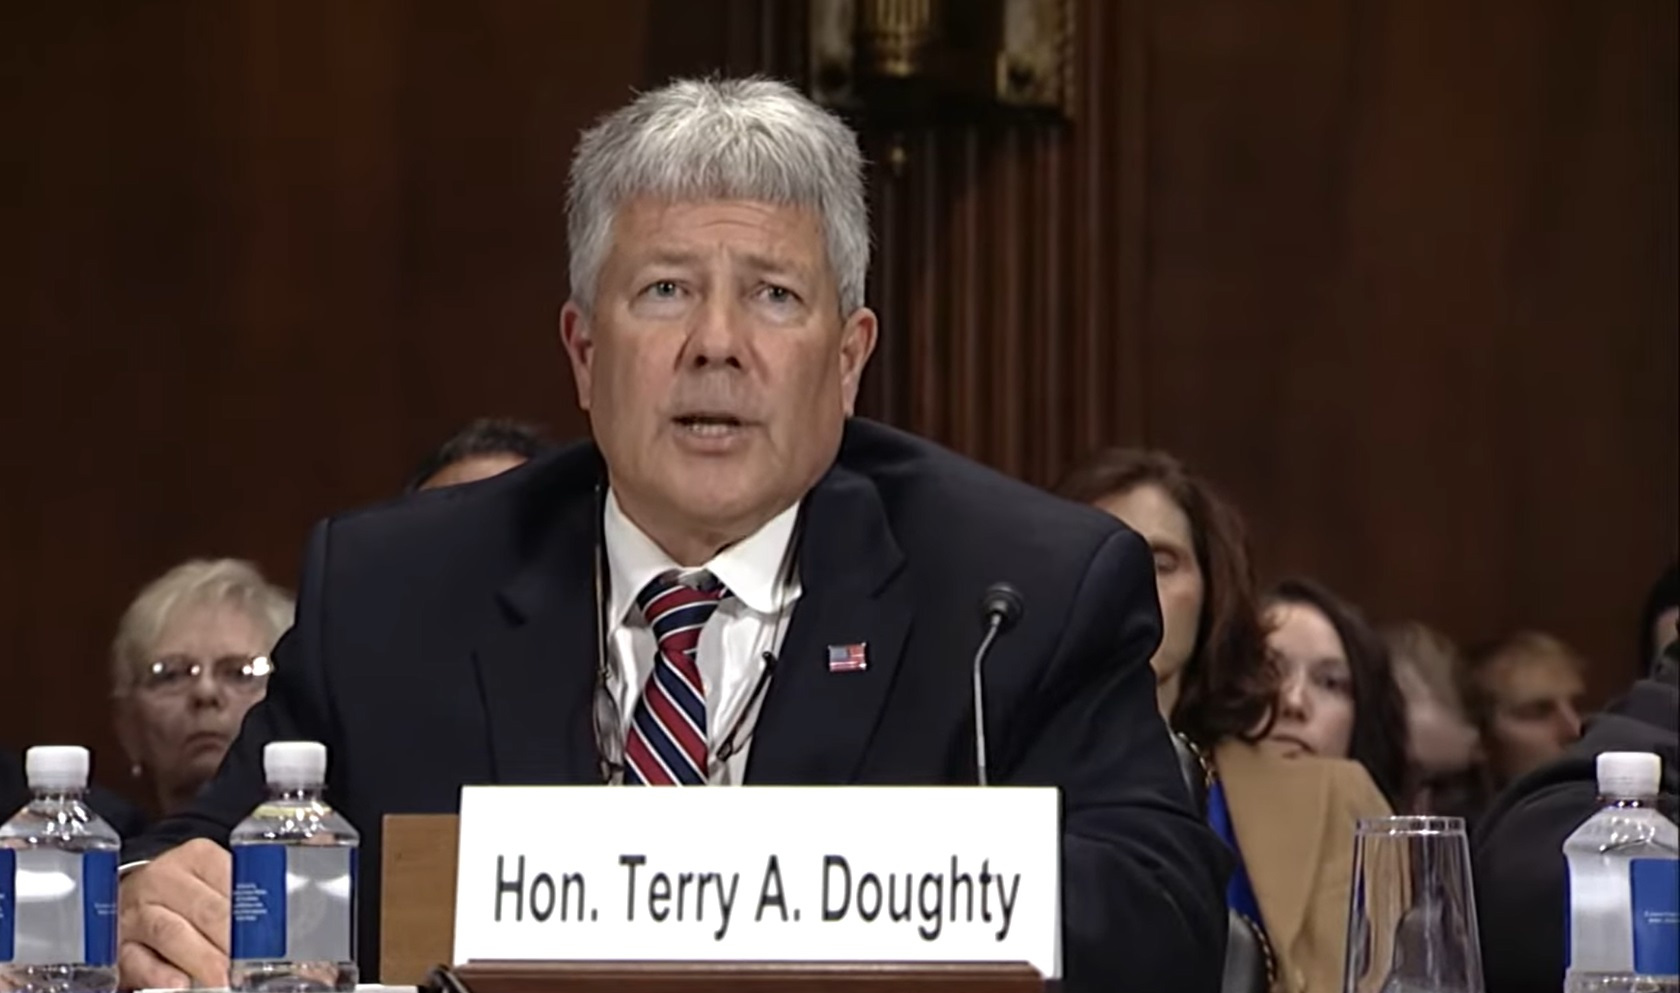 Chief U.S. District Judge Terry Doughty of the Western District of Louisiana